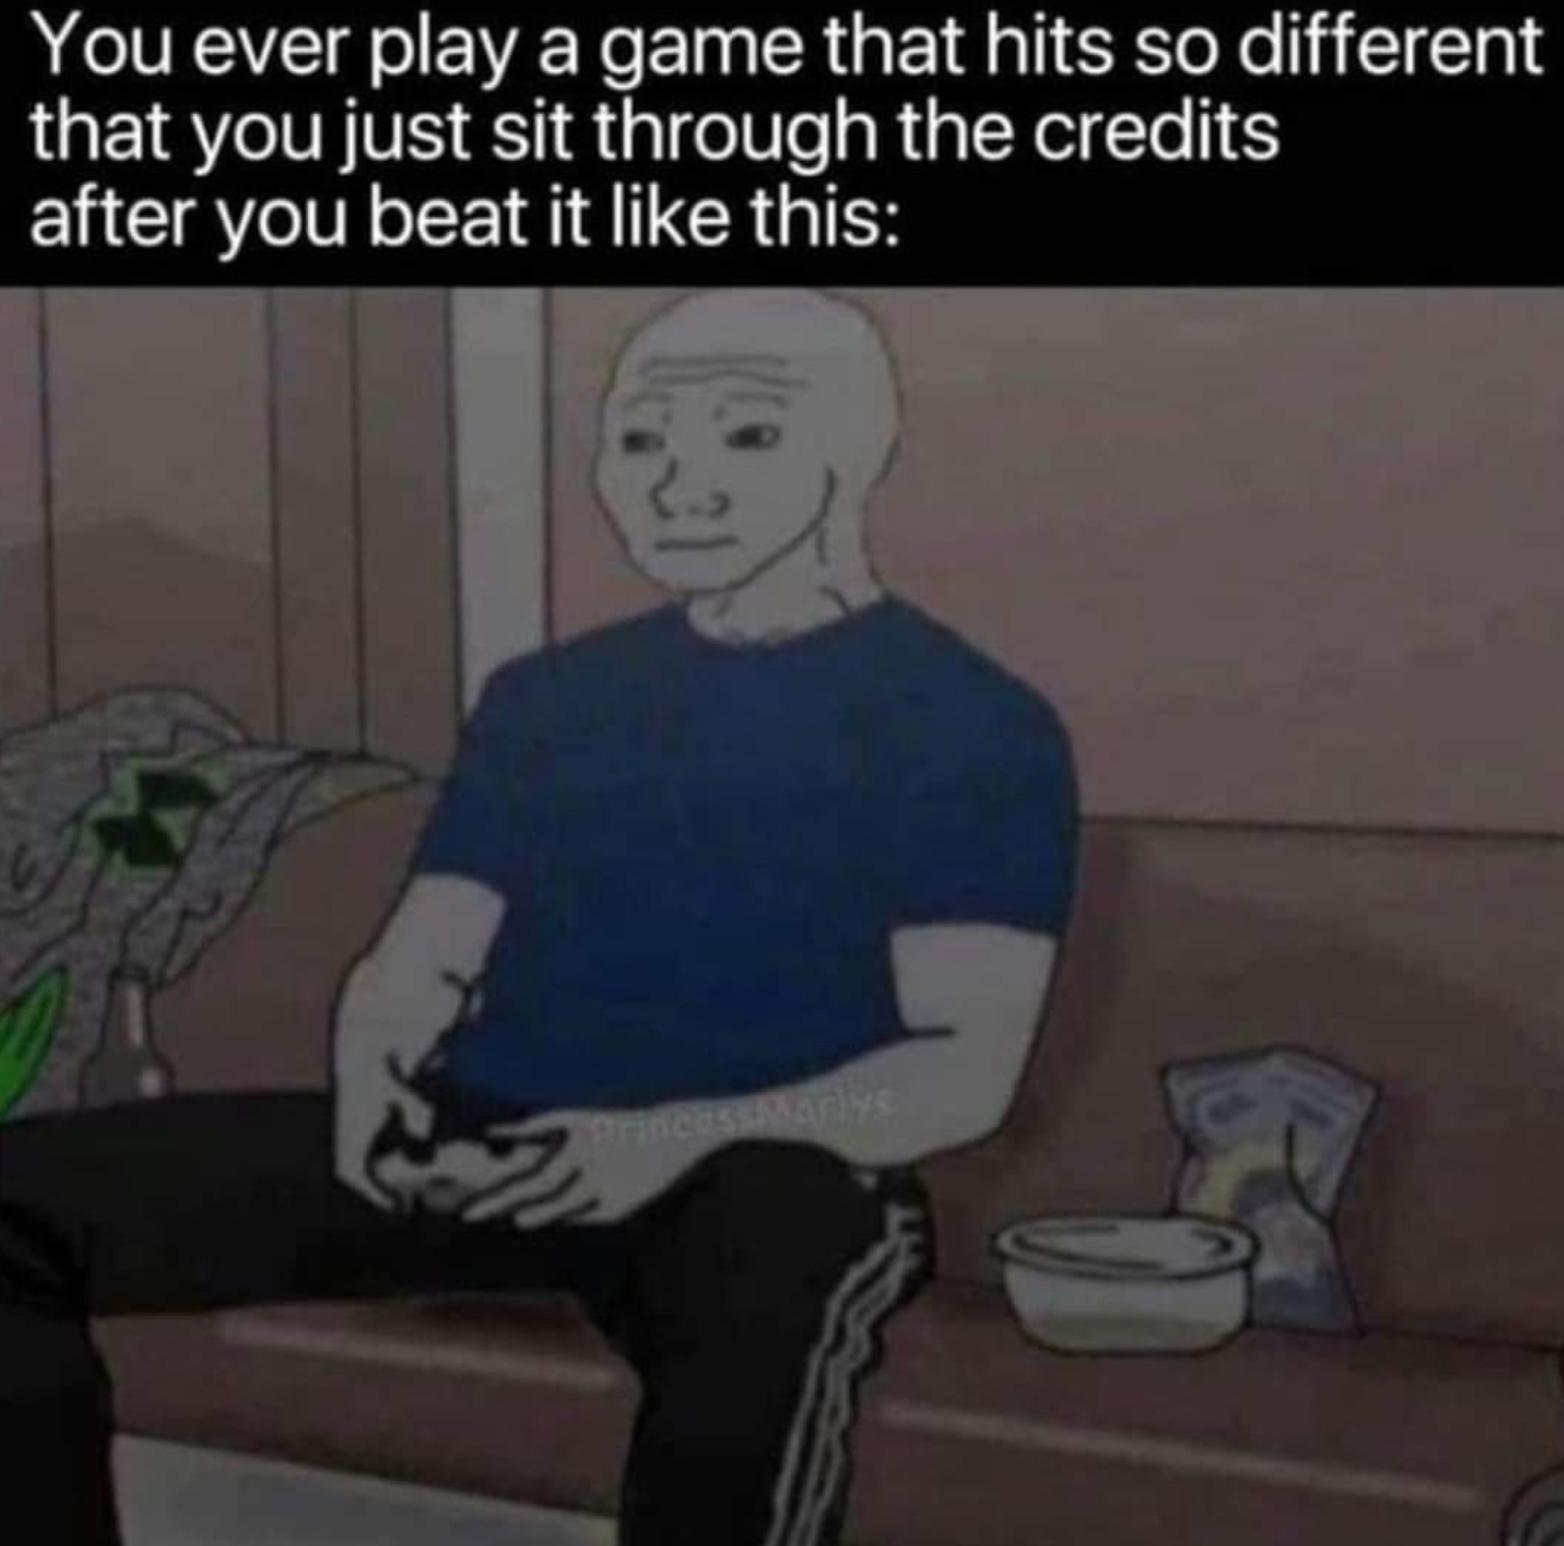 funny gaming memes - you ever play a game that hits so different - You ever play a game that hits so different that you just sit through the credits after you beat it this